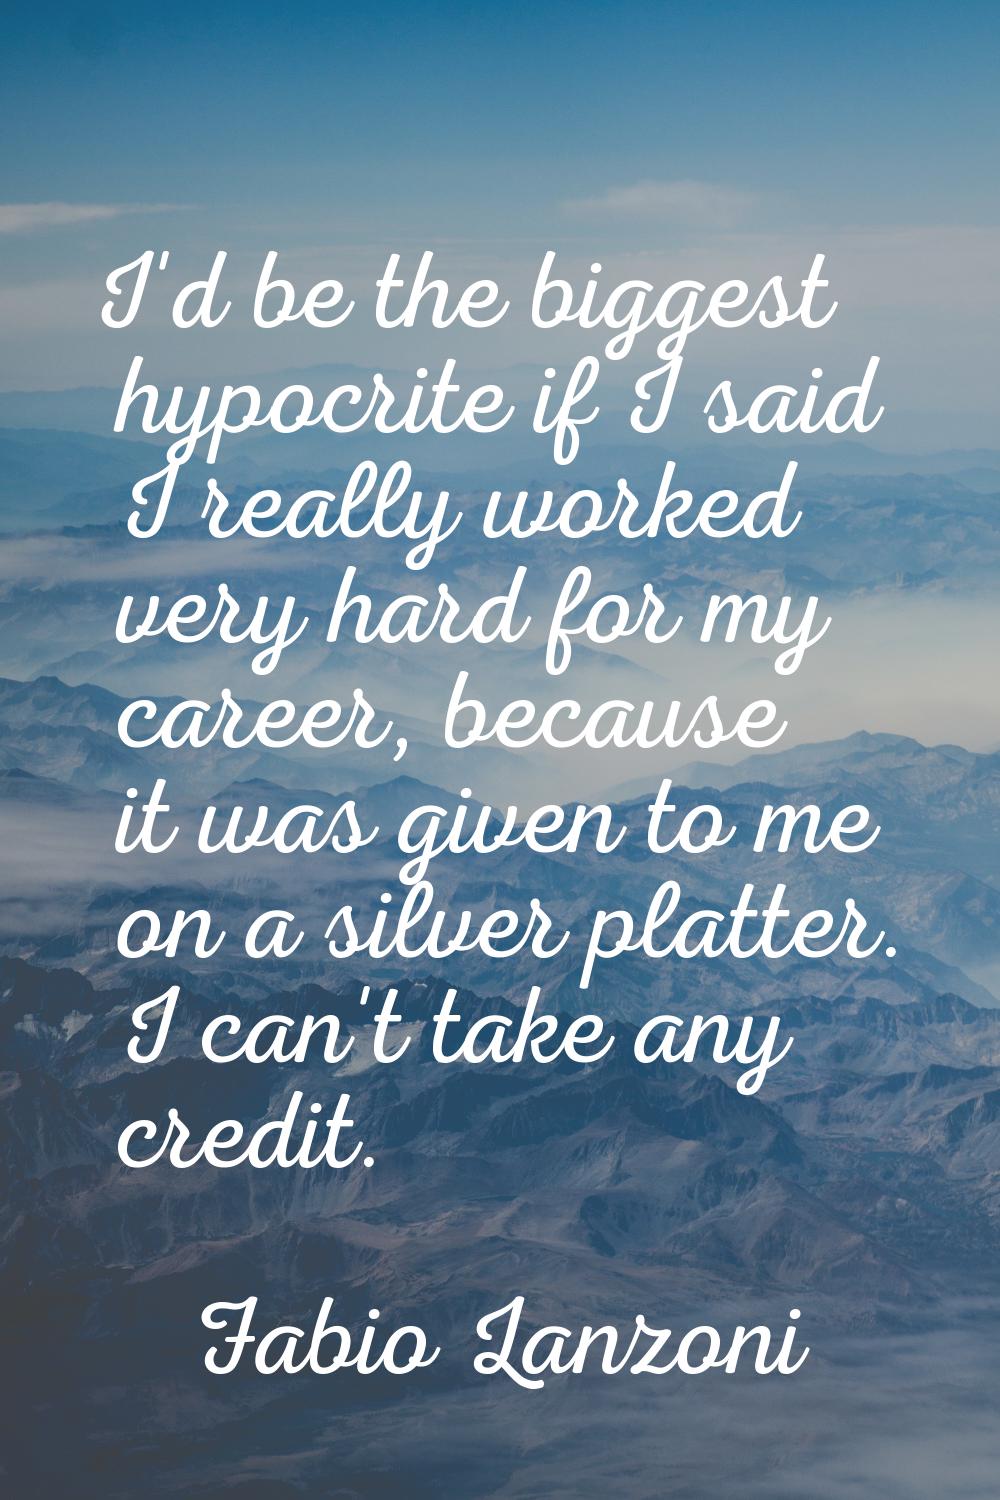 I'd be the biggest hypocrite if I said I really worked very hard for my career, because it was give